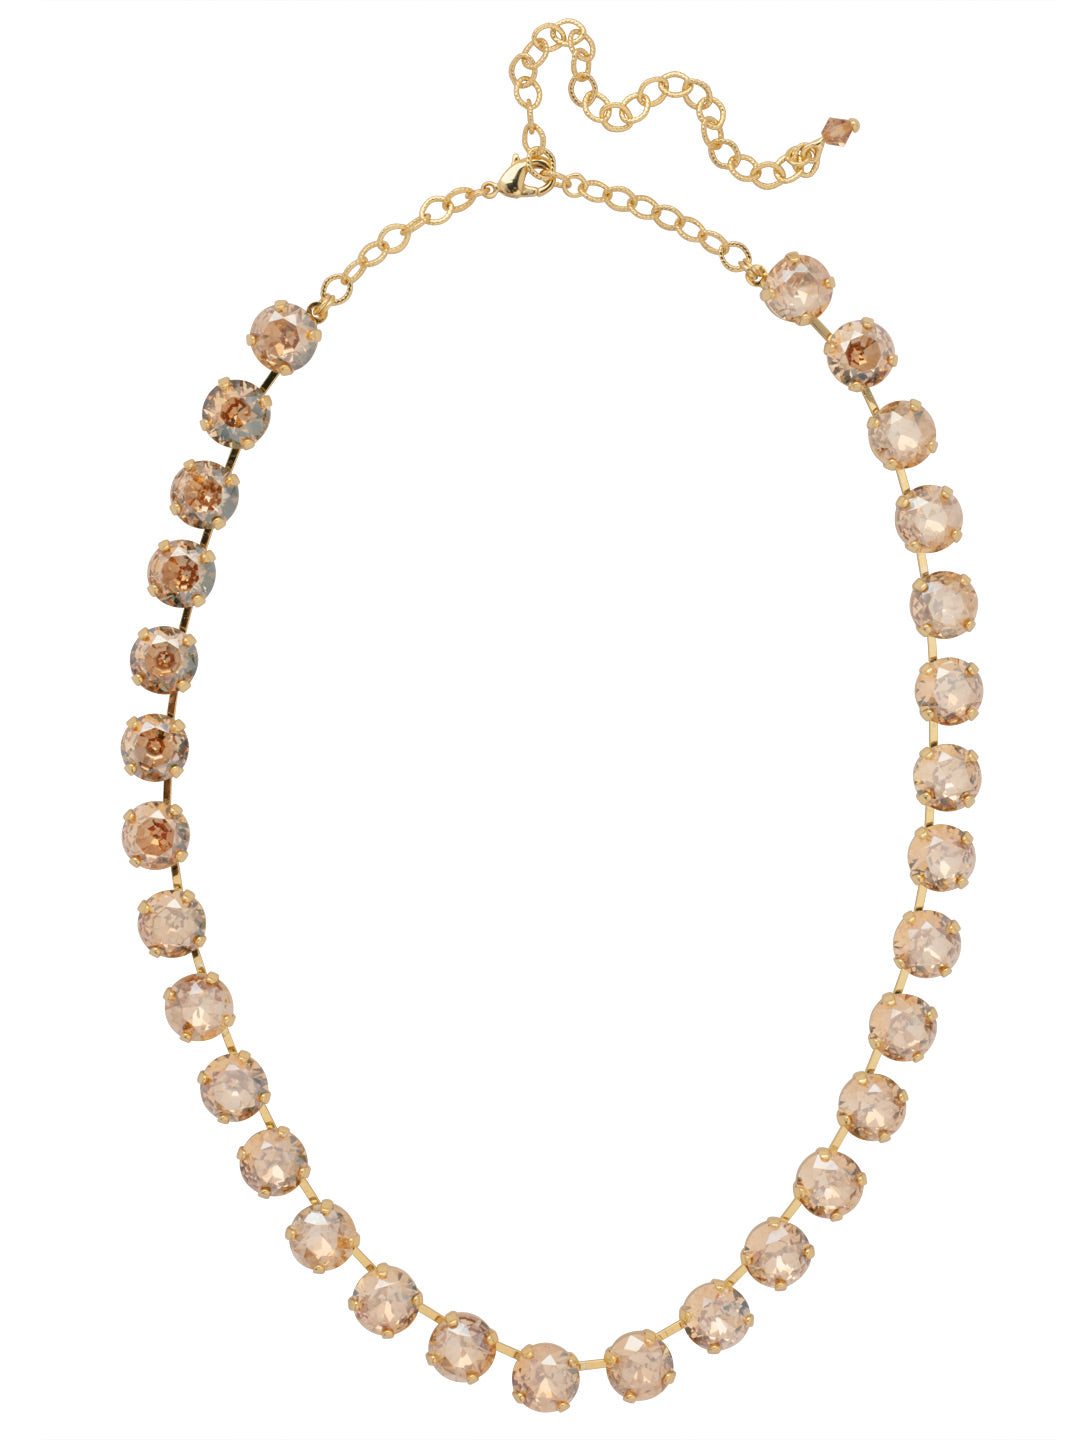 Mara Statement Necklace - NFD75BGGNS - <p>Introducing the Mara Statement Necklace, a perfect blend of classic elegance and contemporary style! This stunning piece showcases a full line of rivoli cut crystals in a sophisticated brass setting, instantly drawing attention. With a variety of metal finishes and crystal colors available, you can effortlessly find the perfect match for your unique taste. The Mara Statement Necklace takes inspiration from a timeless silhouette, making it an incredibly versatile accessory that can dress up a casual outfit or add a touch of sparkle to an evening ensemble. This must-have staple for any wardrobe offers endless possibilities for mixing and matching. Whether you're on the hunt for a striking statement piece or a thoughtful gift, the Mara Statement Necklace is the ultimate choice. Indulge in this fashionable accessory and watch as you light up the room with your radiant glow! From Sorrelli's Golden Shadow collection in our Bright Gold-tone finish.</p>